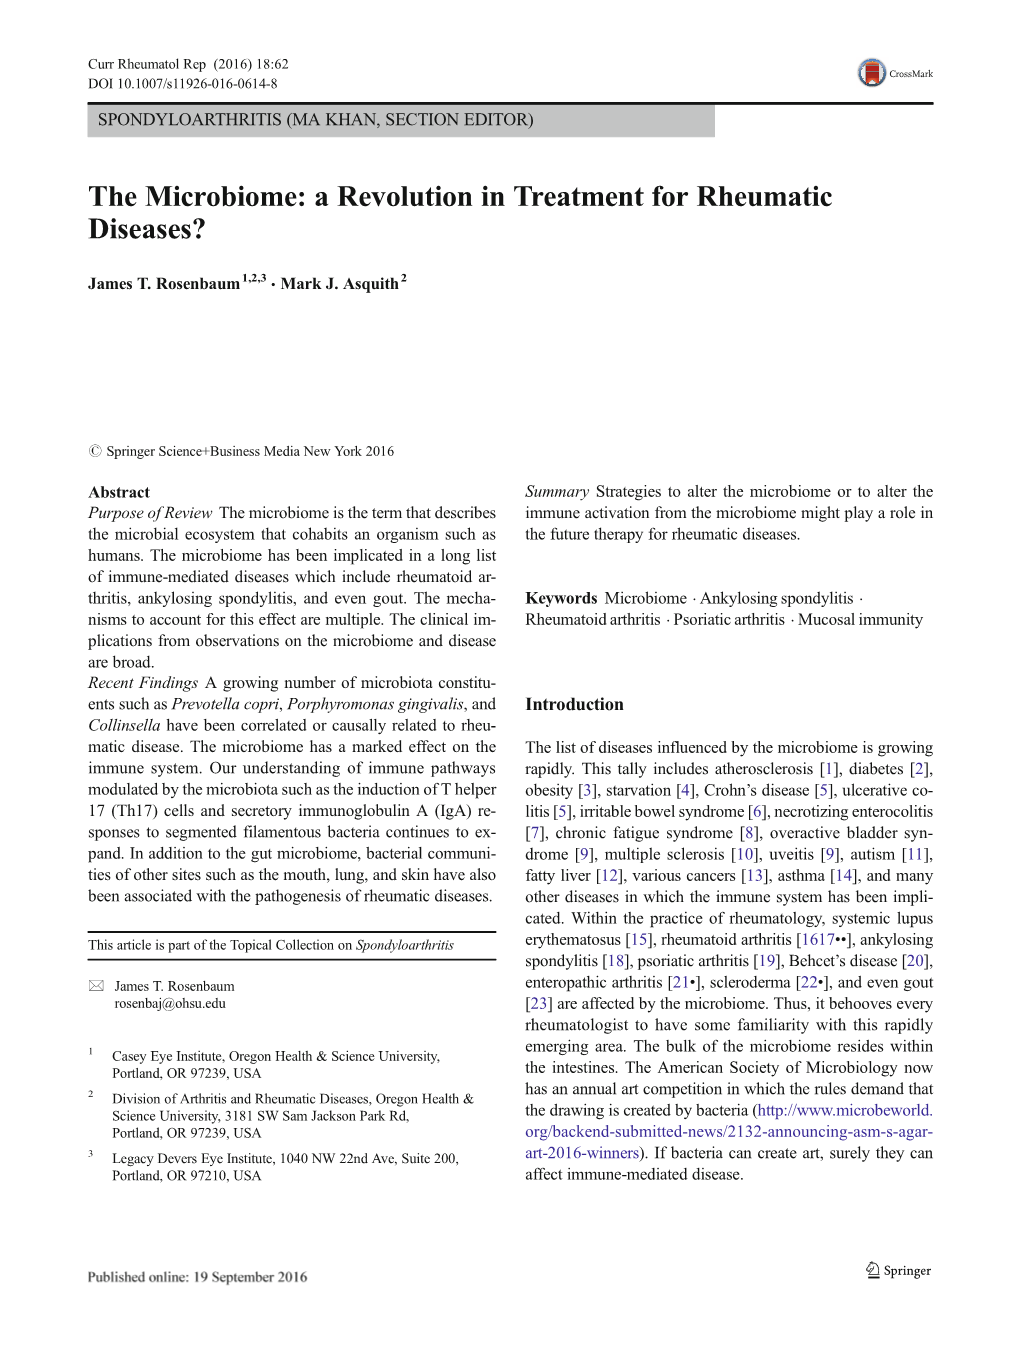 The Microbiome: a Revolution in Treatment for Rheumatic Diseases?